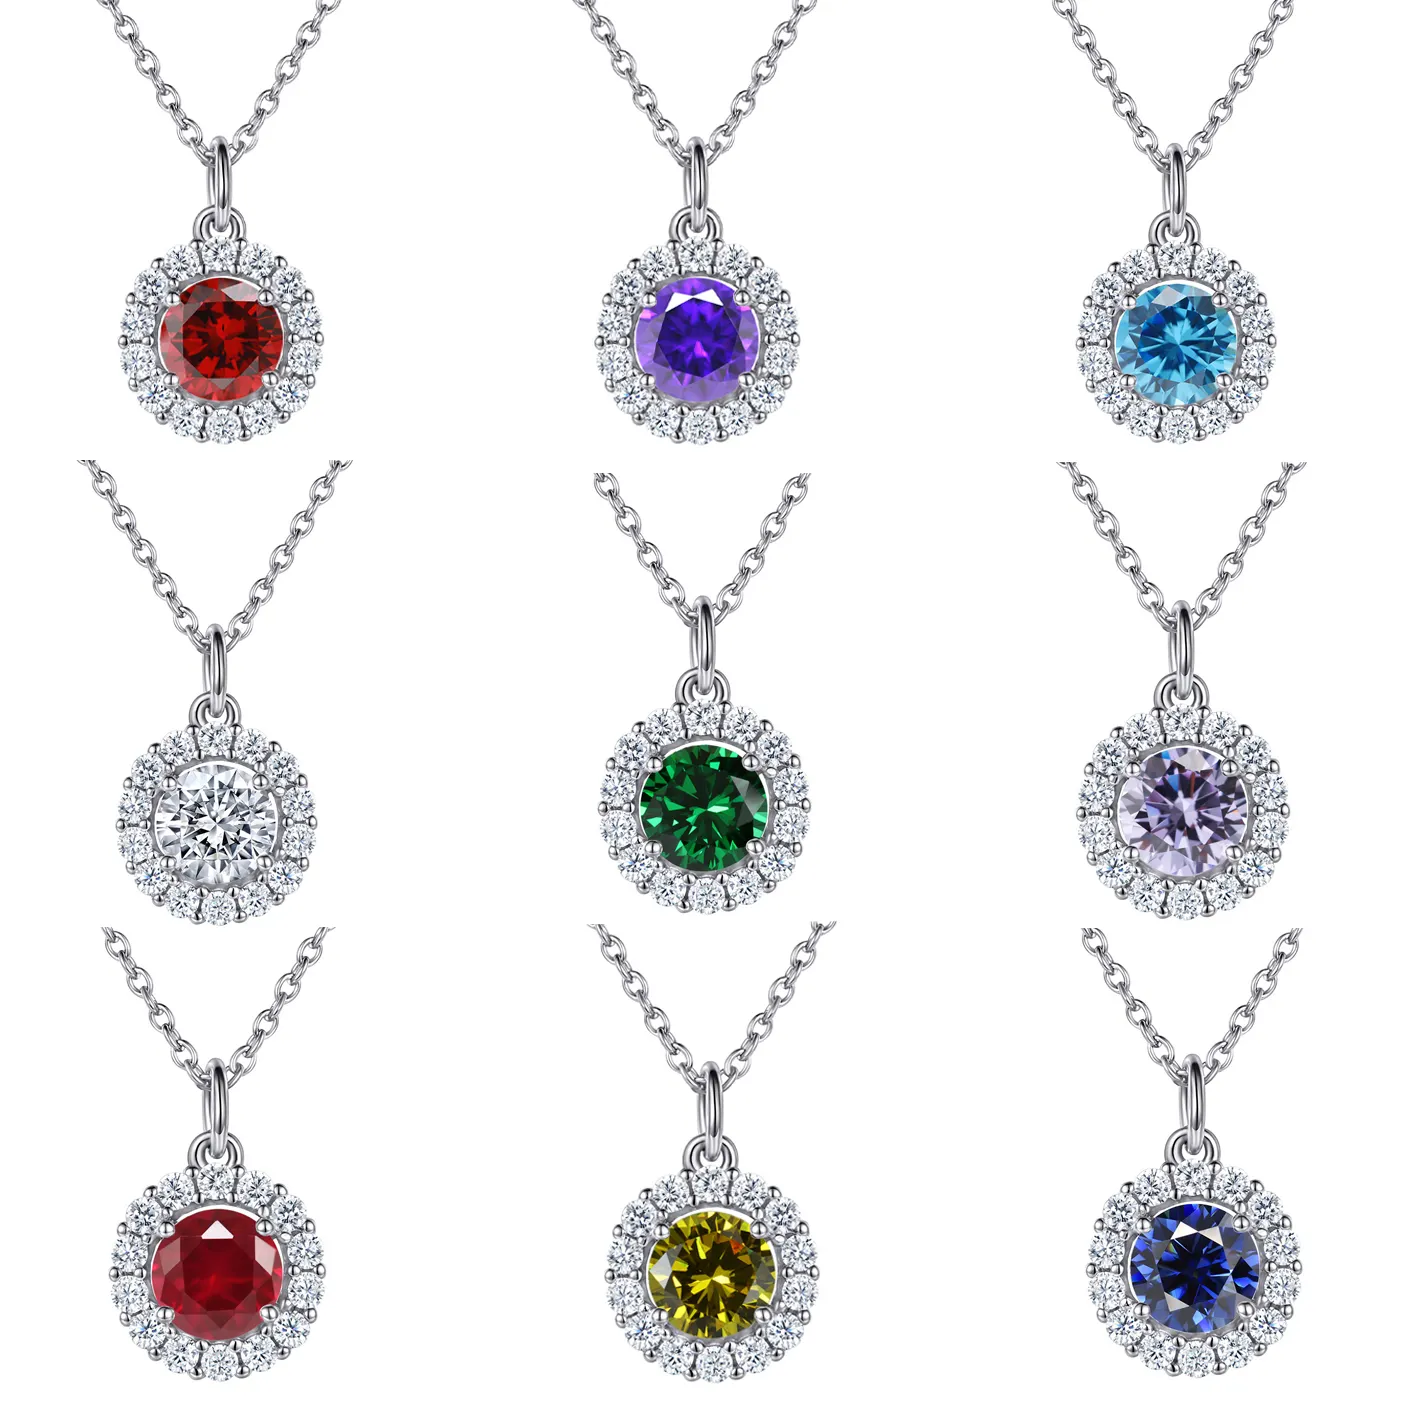 New Arrive Birthstone Crystal Pendant Original Design Women Jewelry 925 Sterling Silver Necklace